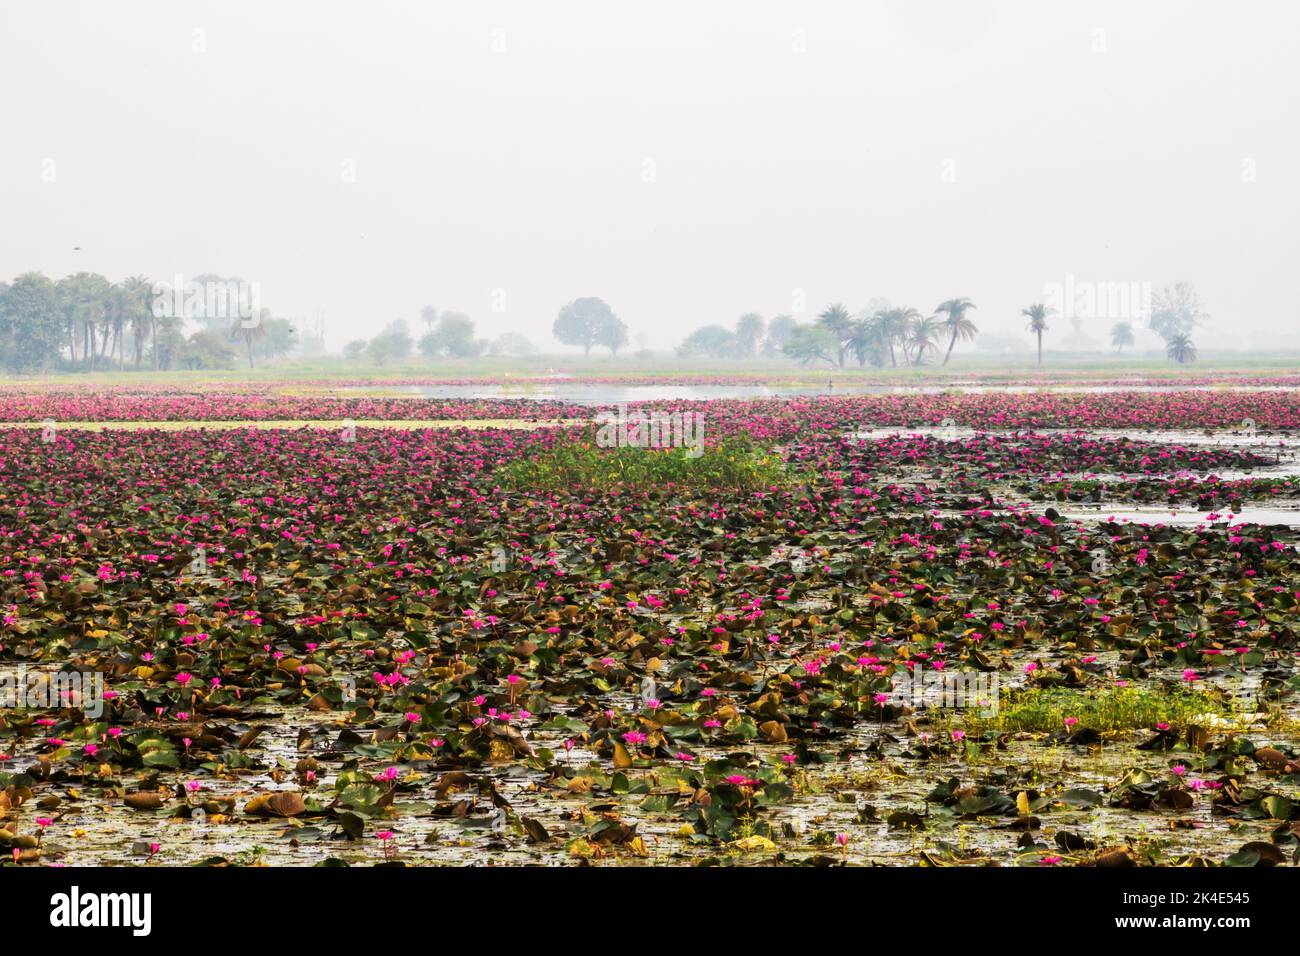 A beautiful shot of the Red Lotus Sea with blooming pink flowers floating on the surface Stock Photo